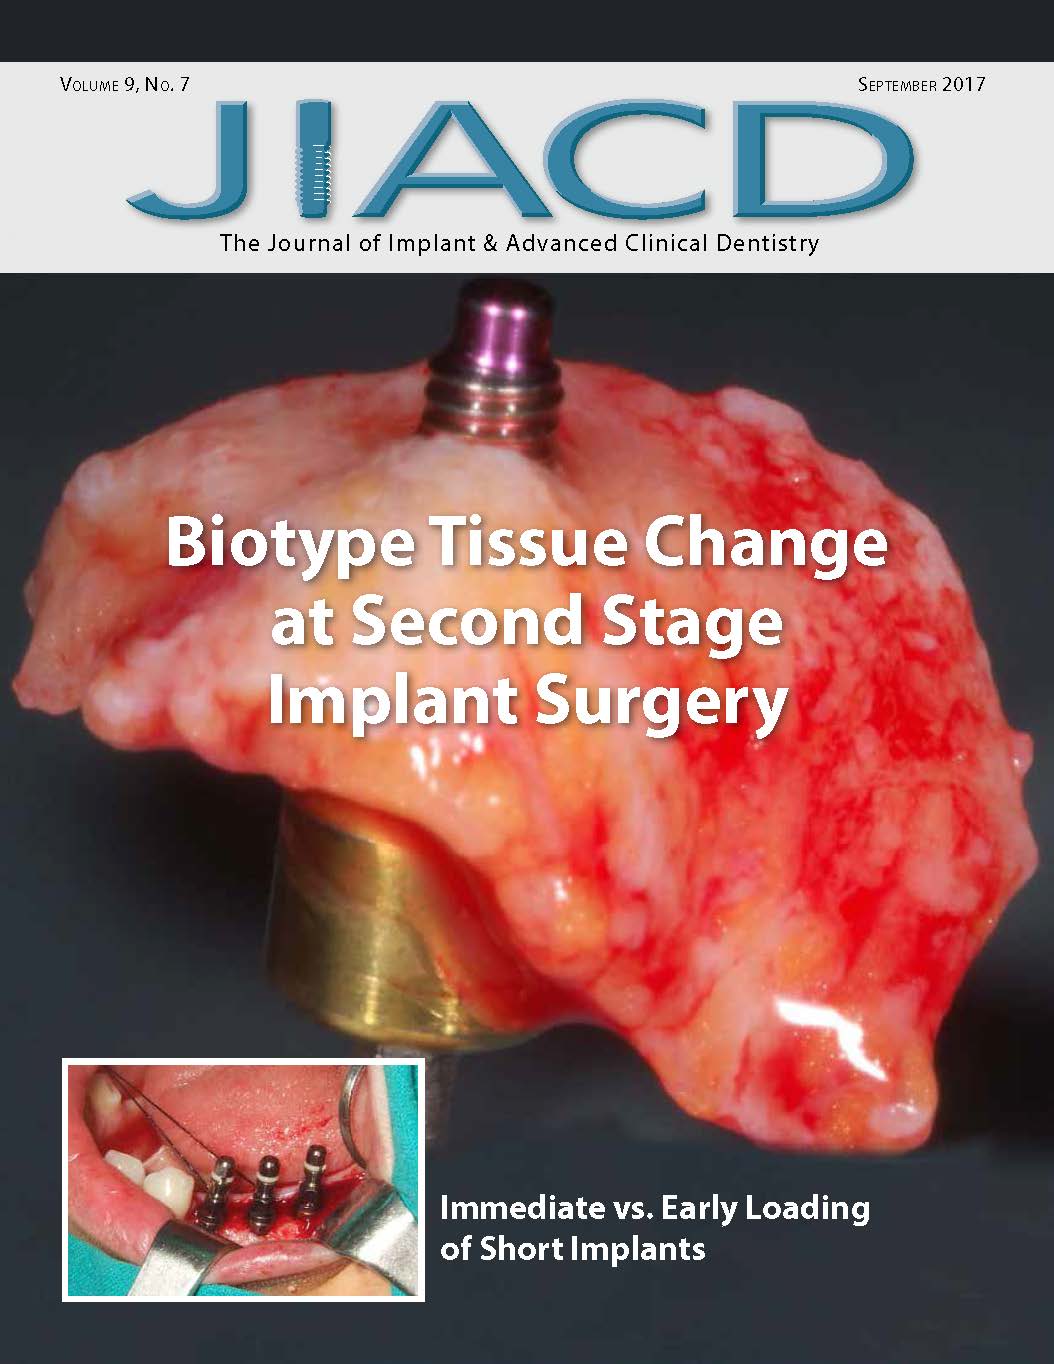 Biotype Tissue Change at Second Stage Implant Surgery